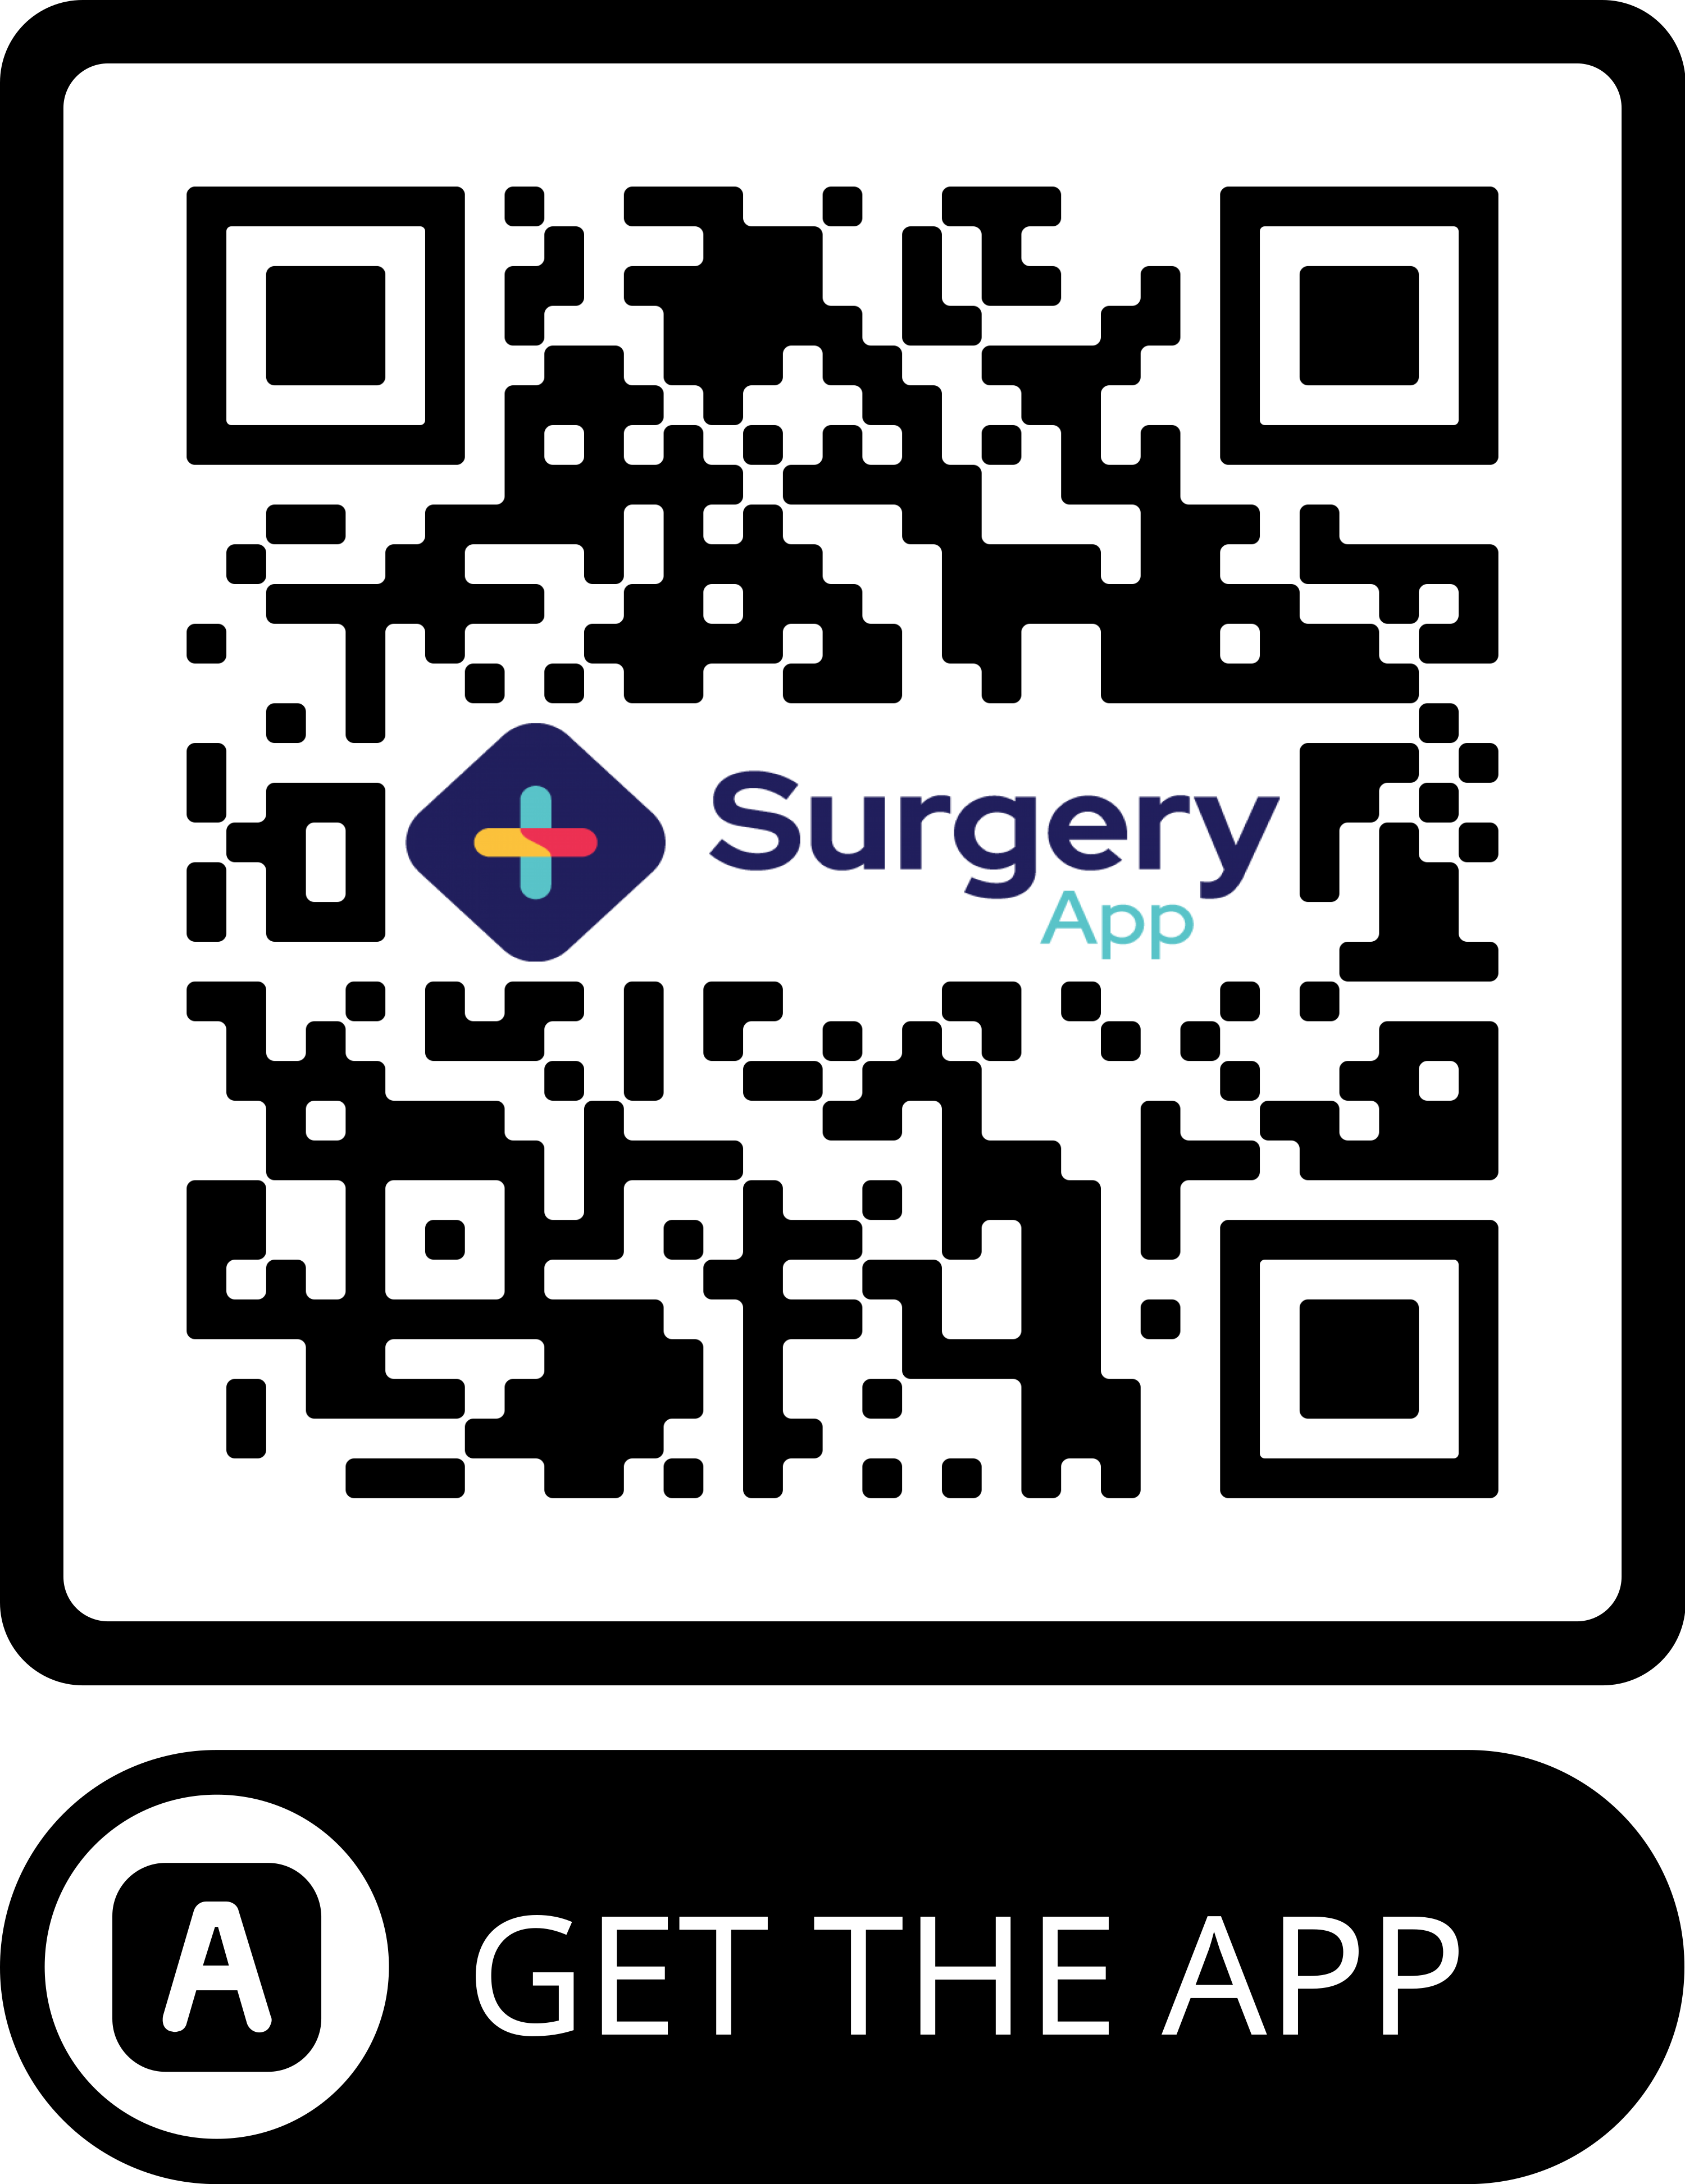 Scan this QR code to get the surgery app